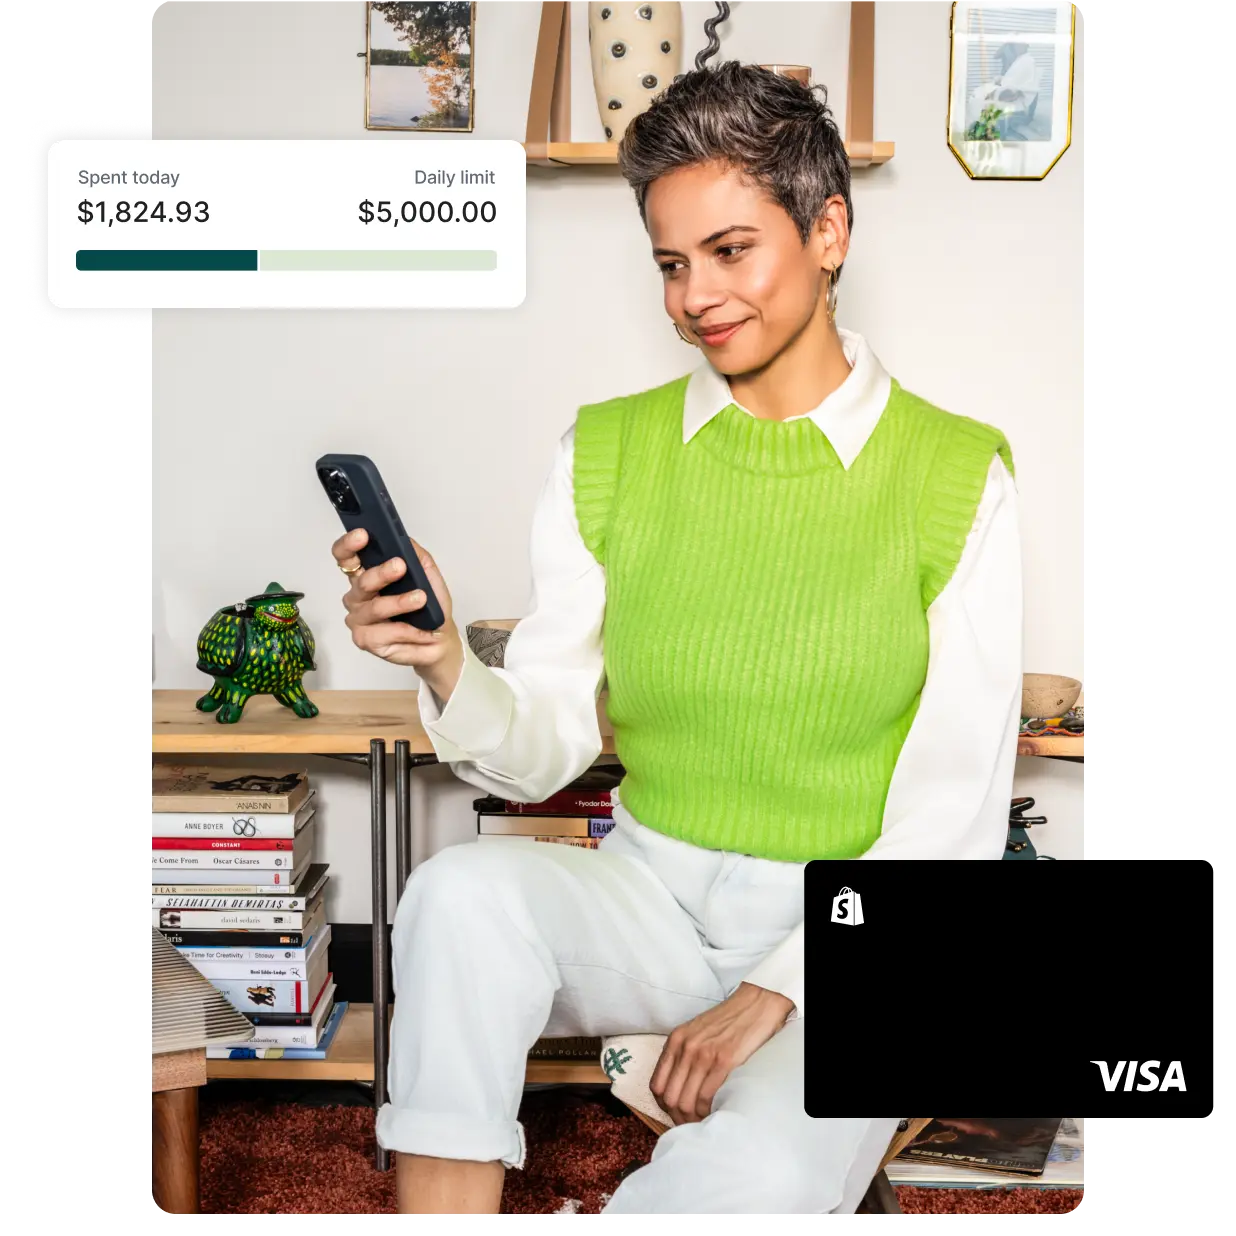 A Spanish woman wearing a bright green vest smiles while looking at her Shopify Balance account on her mobile device.